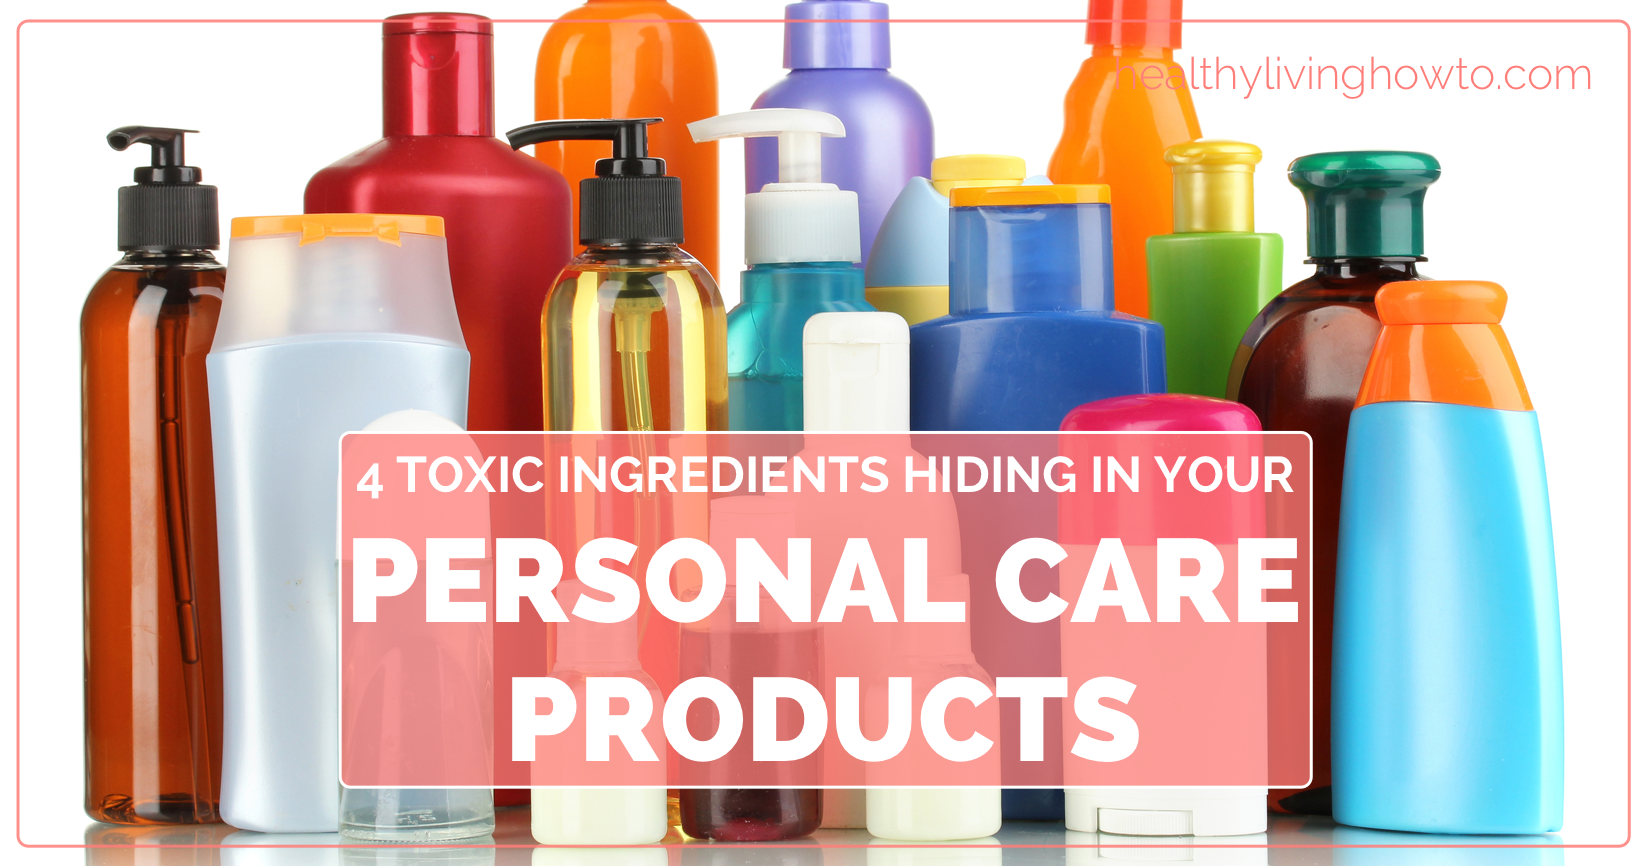 4 Toxic Ingredients Hiding In Your Personal Care Products | healthylivinghowto.com